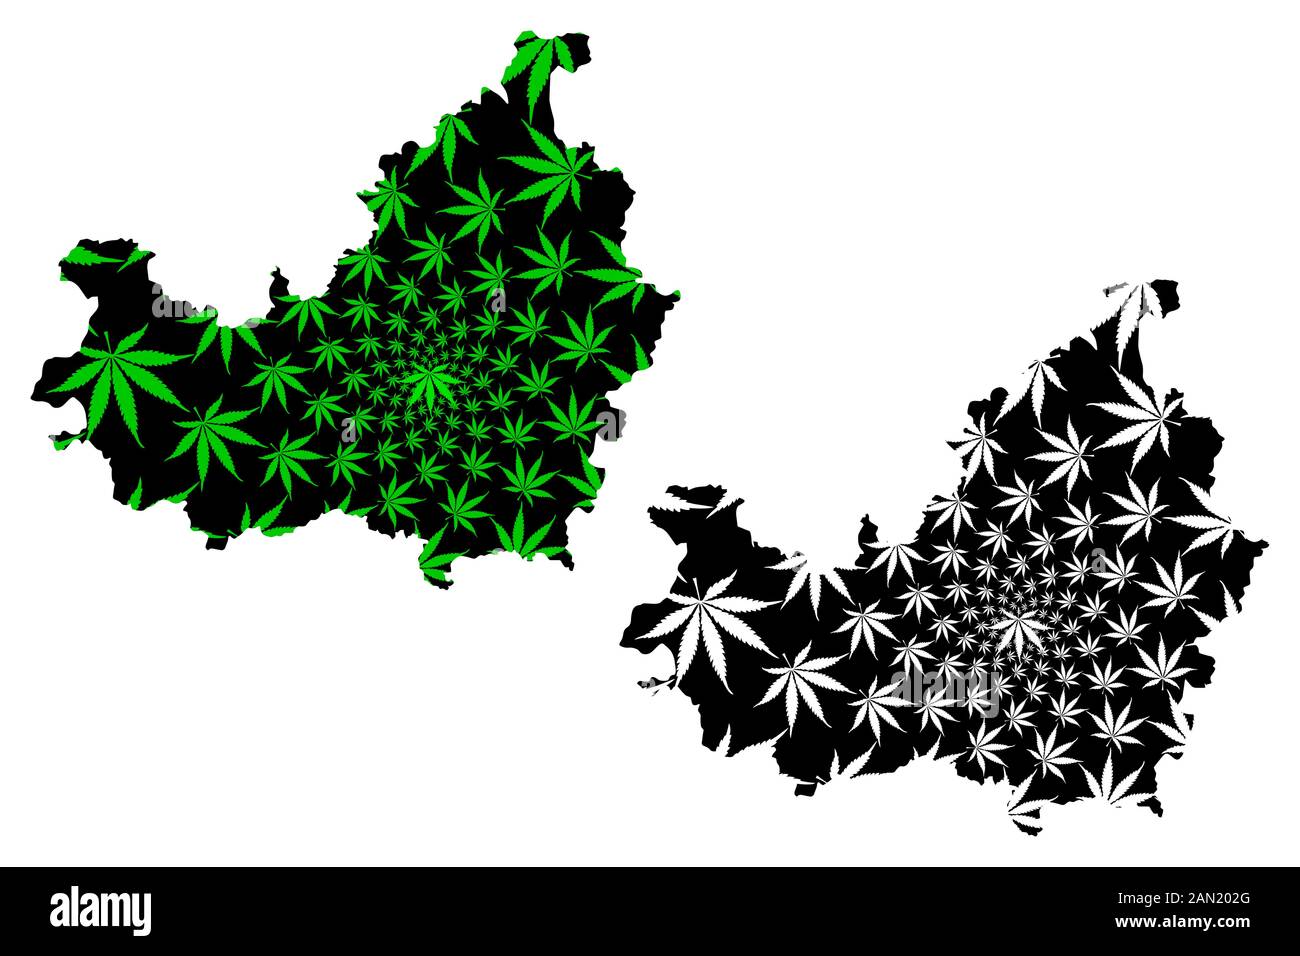 Cluj County (Administrative divisions of Romania, Nord-Vest development region) map is designed cannabis leaf green and black, Cluj map made of mariju Stock Vector